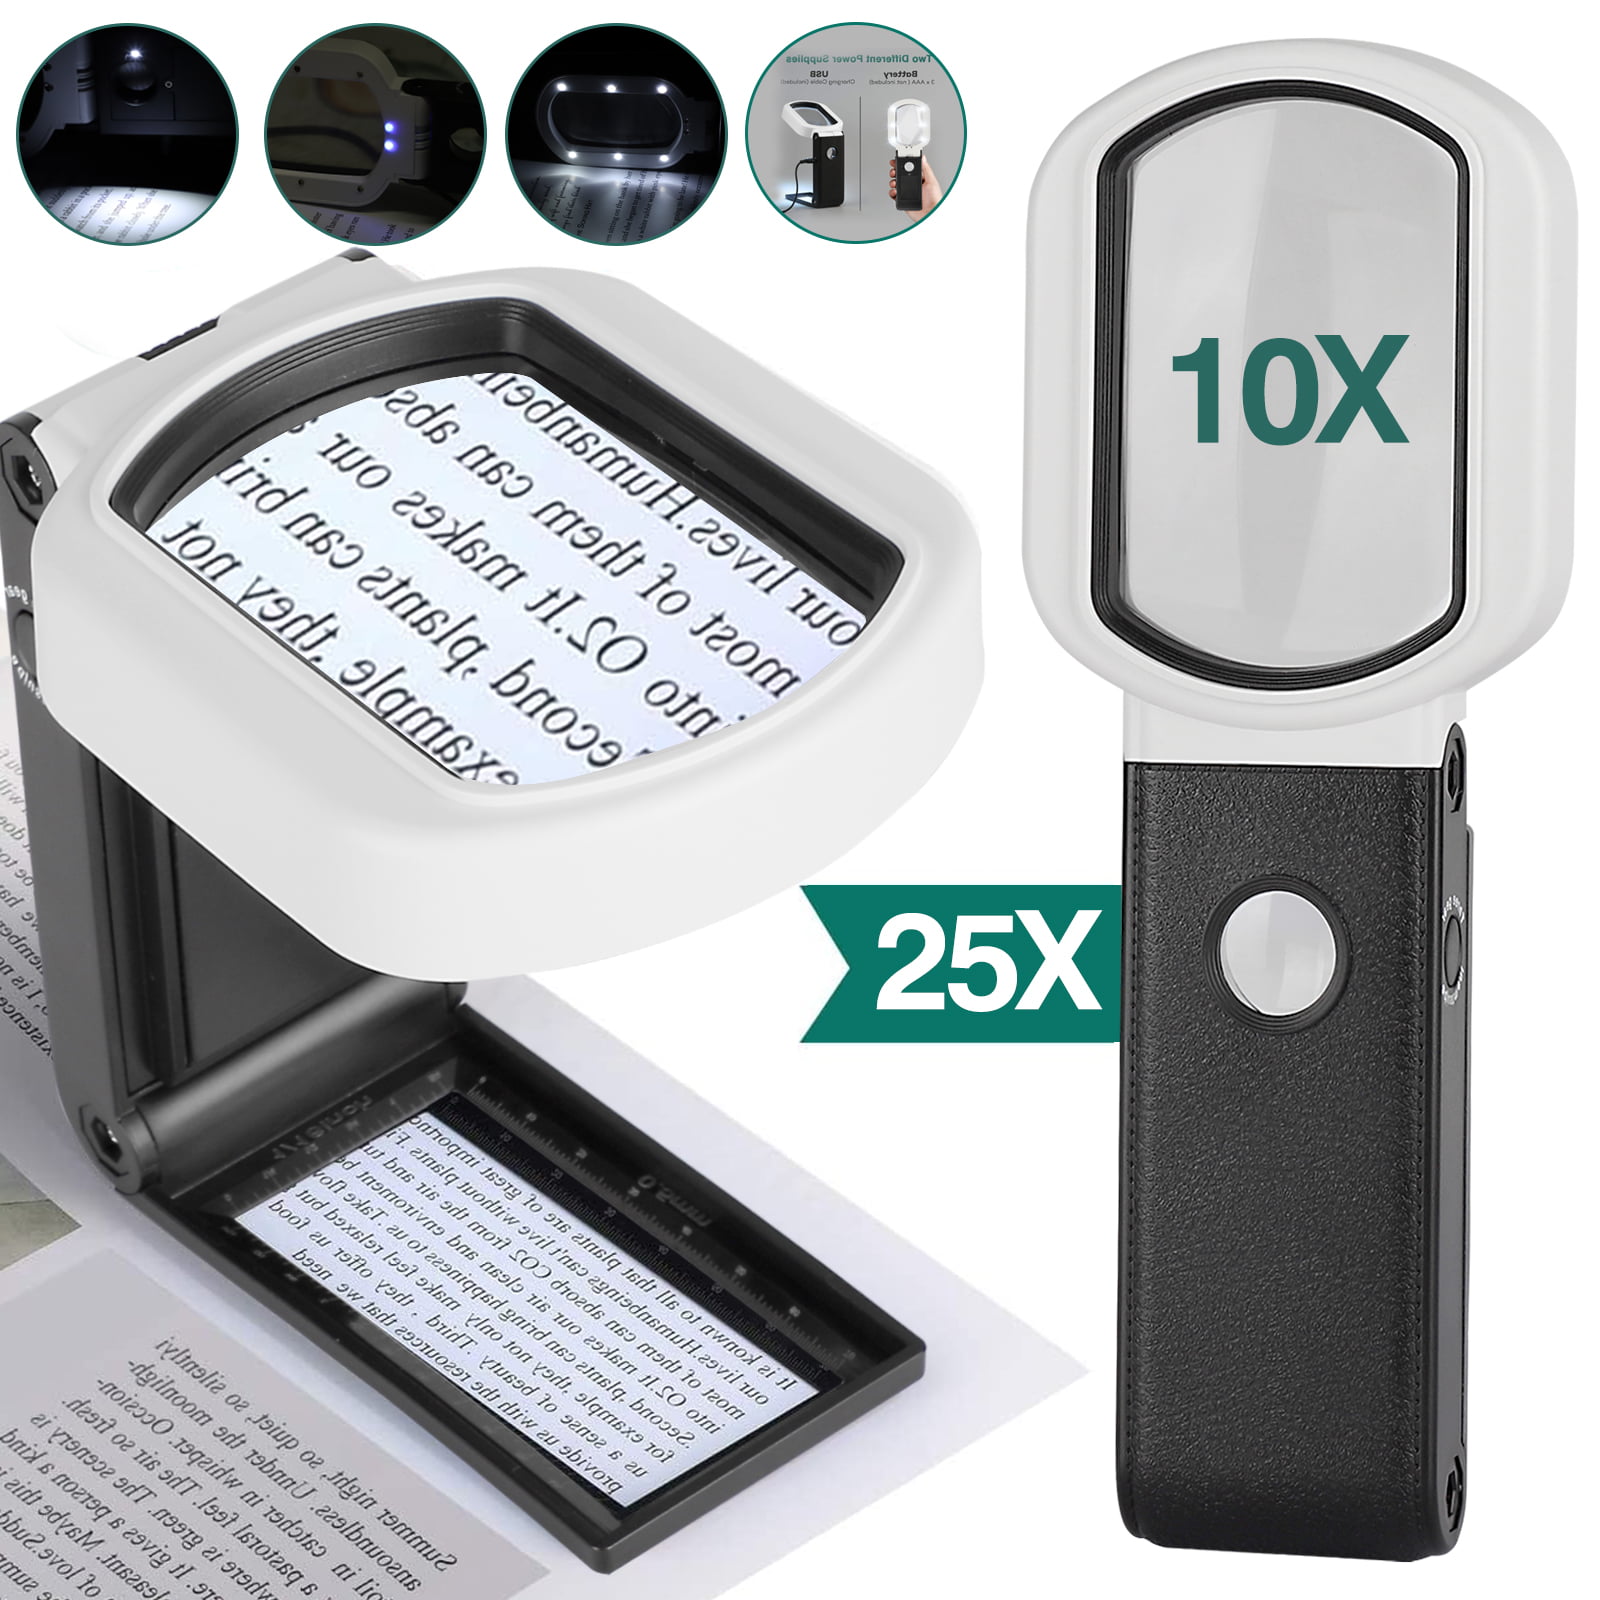 Handheld Magnifier with 6 x and 2 x Lens Jewellery Work LED Rectangle Magnifying Glass with light by Kovira Newspaper Reading Magnifying Glass for Books Magnifier Glass Coin Examining & more 